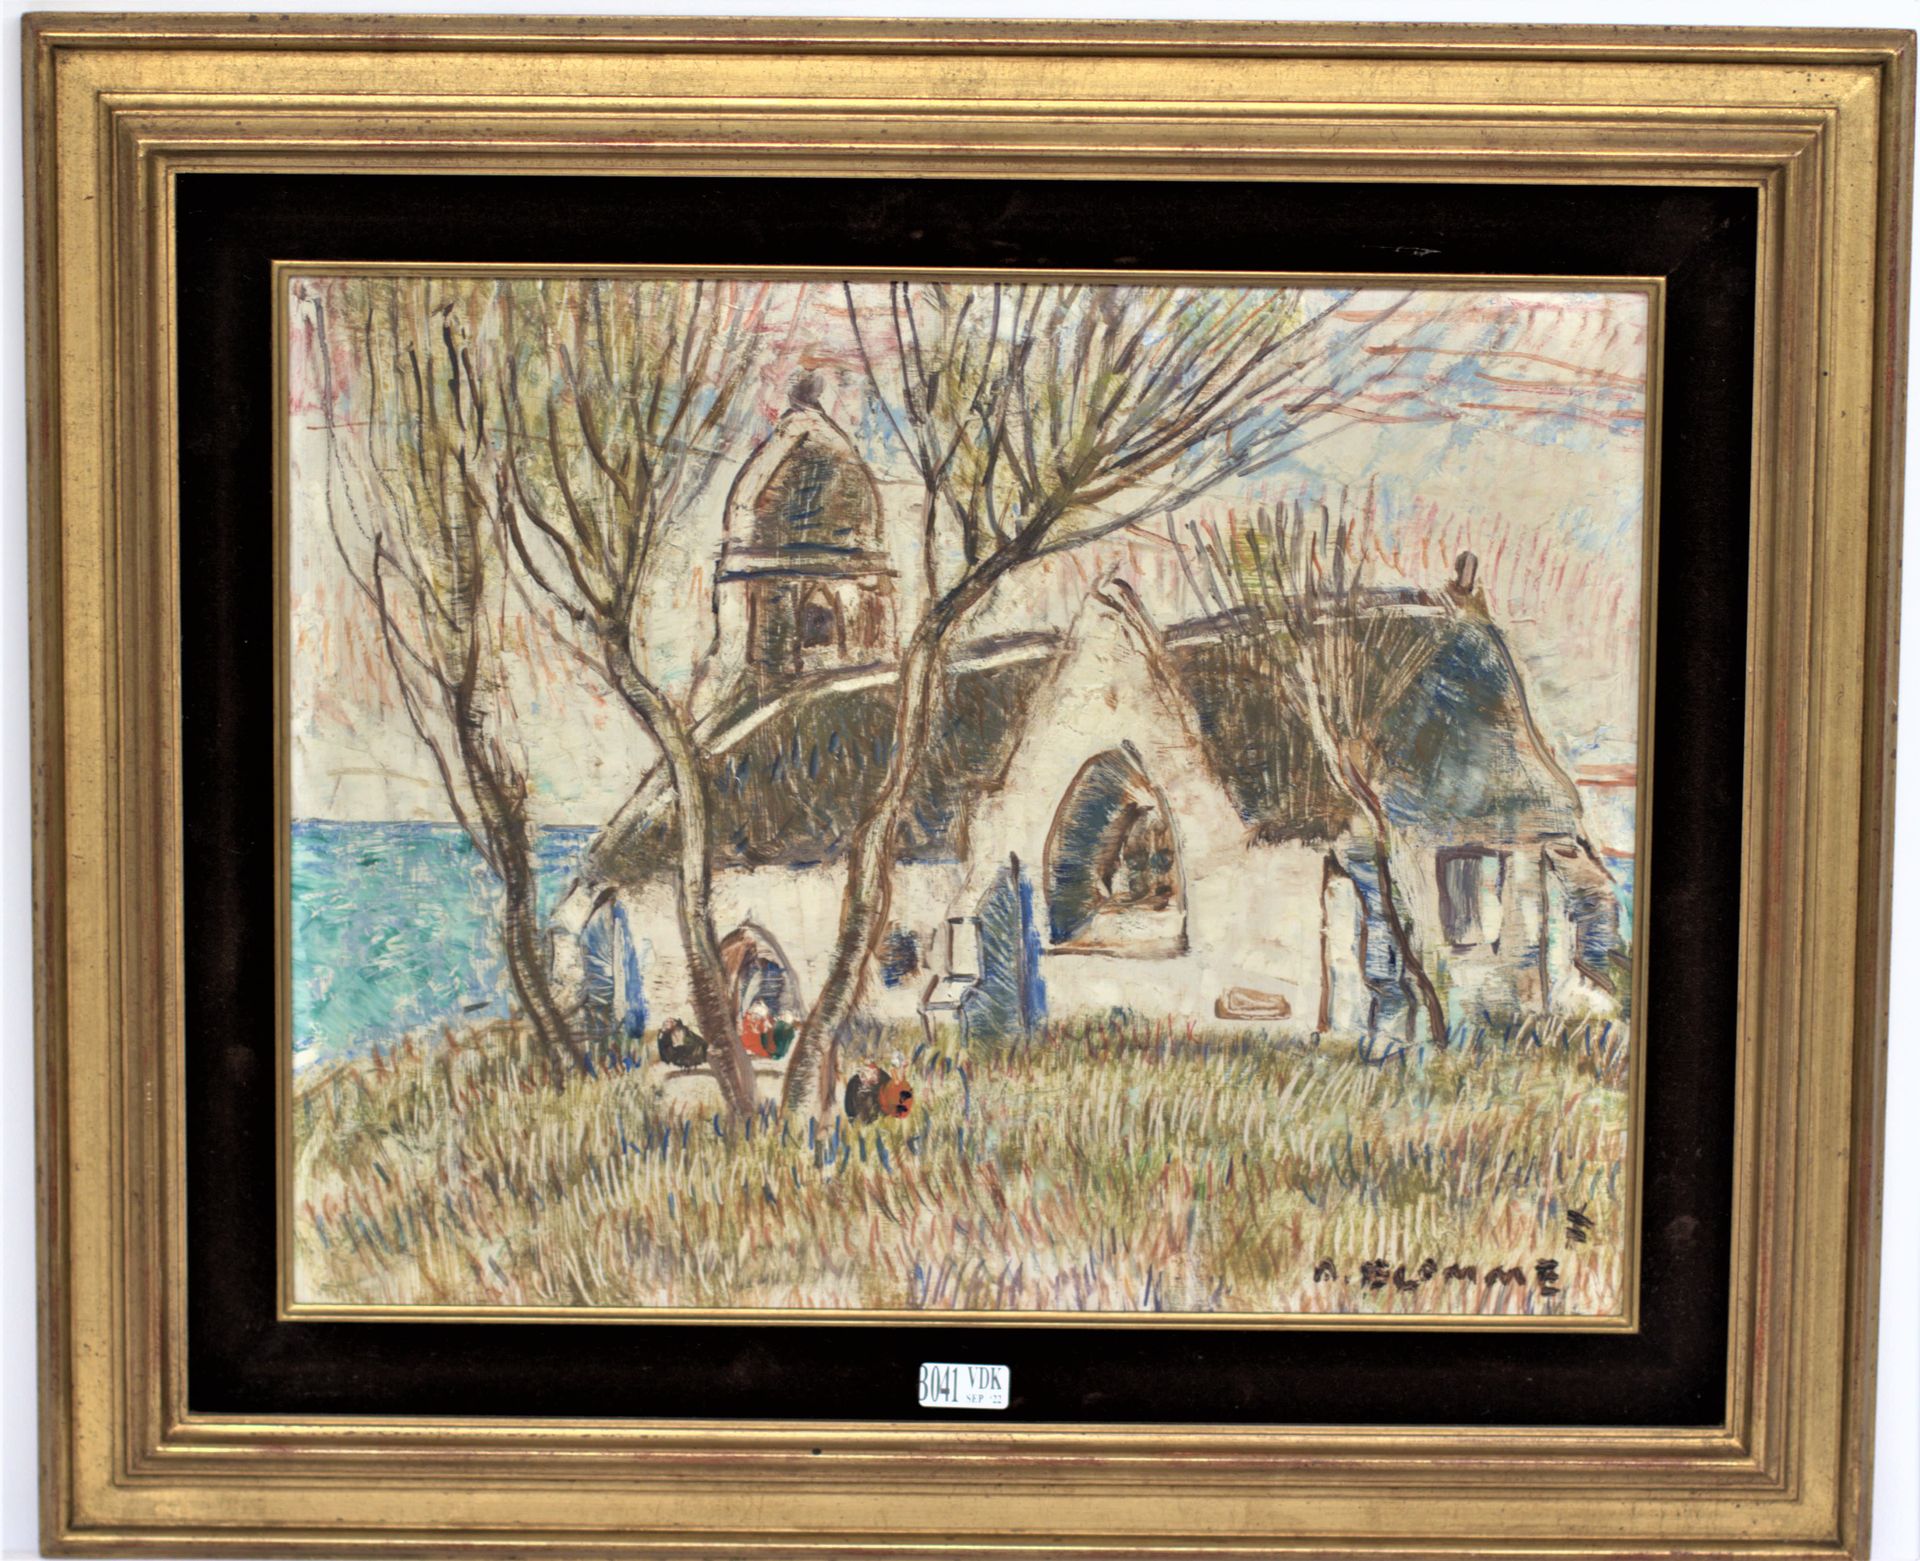 Null Oil on panel "Chapel by the sea". _x000D_

Signed Alfons Blomme._x000D_

Si&hellip;